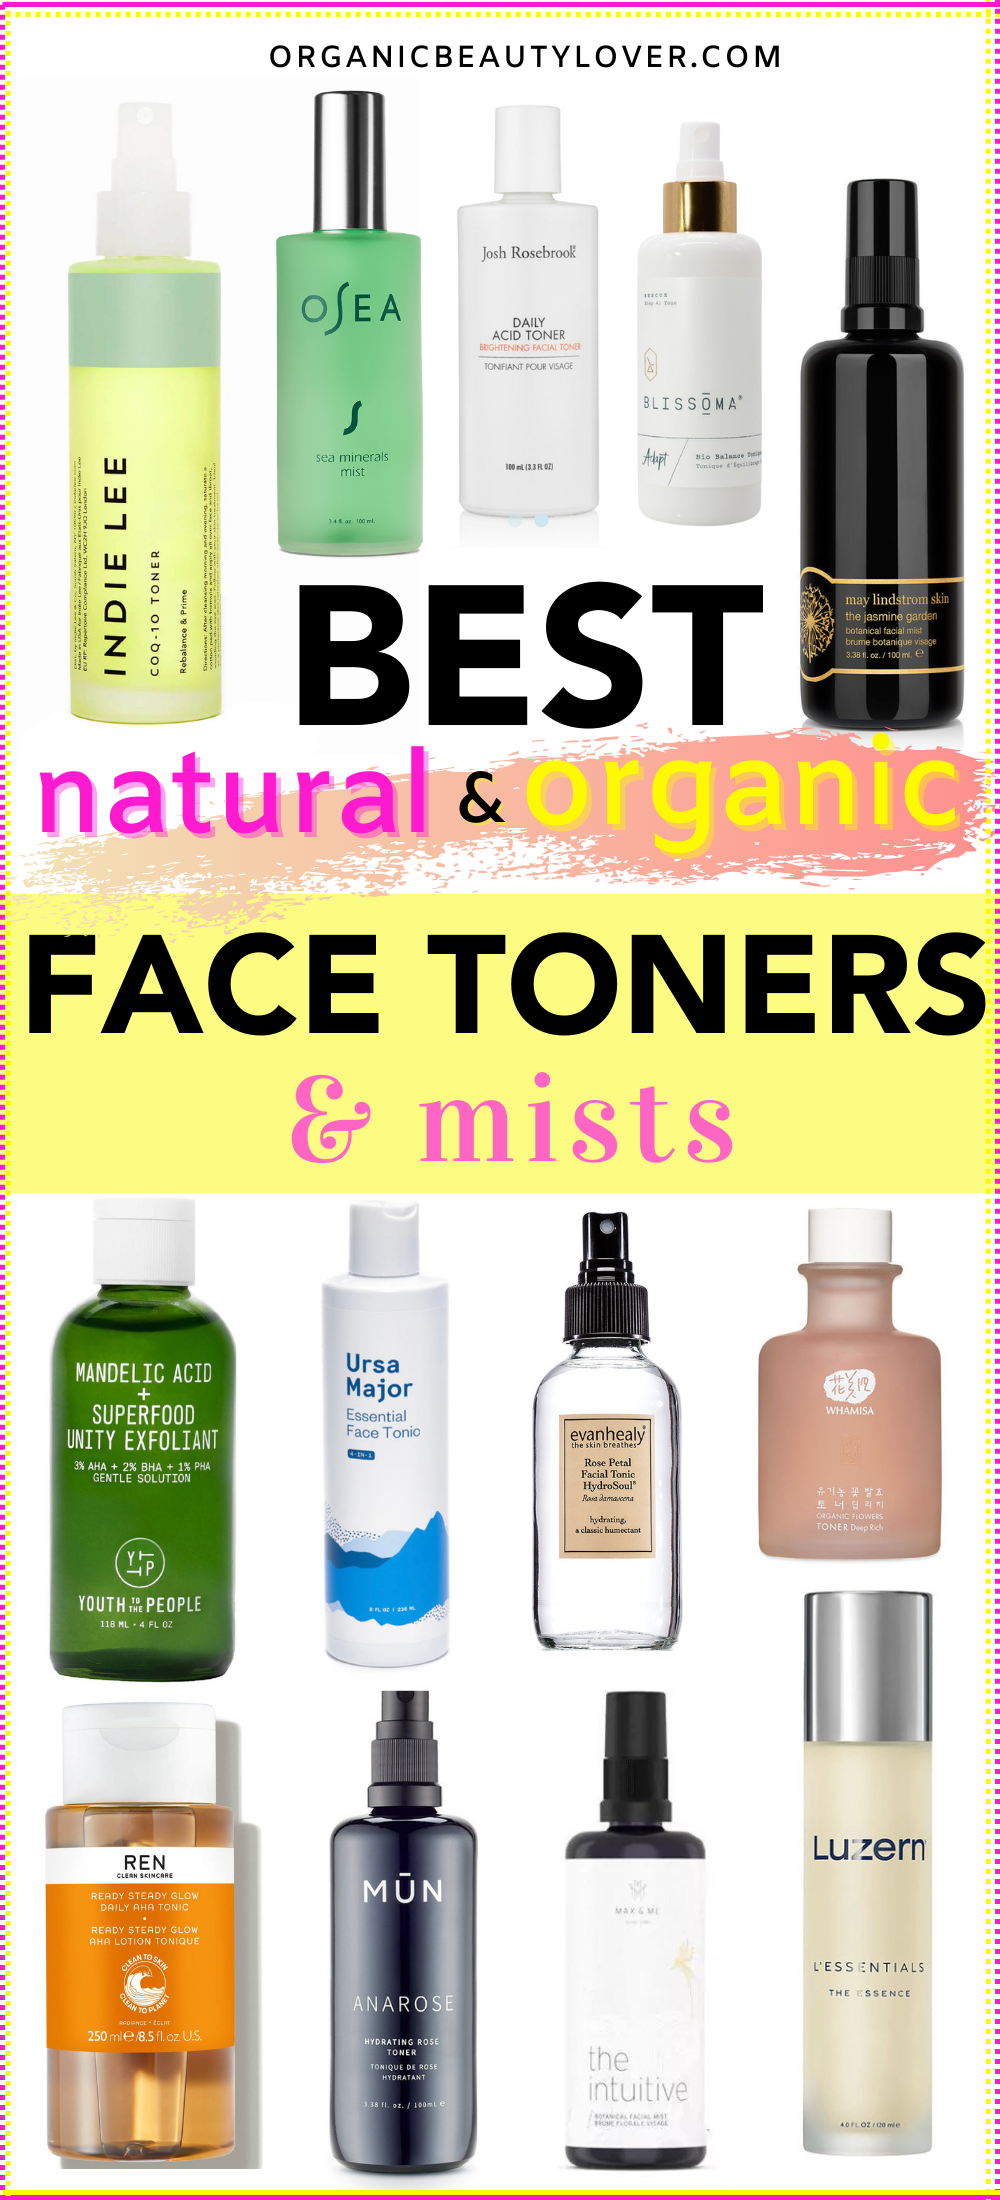 Sige Meningsfuld Distill 25 Best Natural Organic Toners for Every Skin Type – ORGANIC BEAUTY LOVER